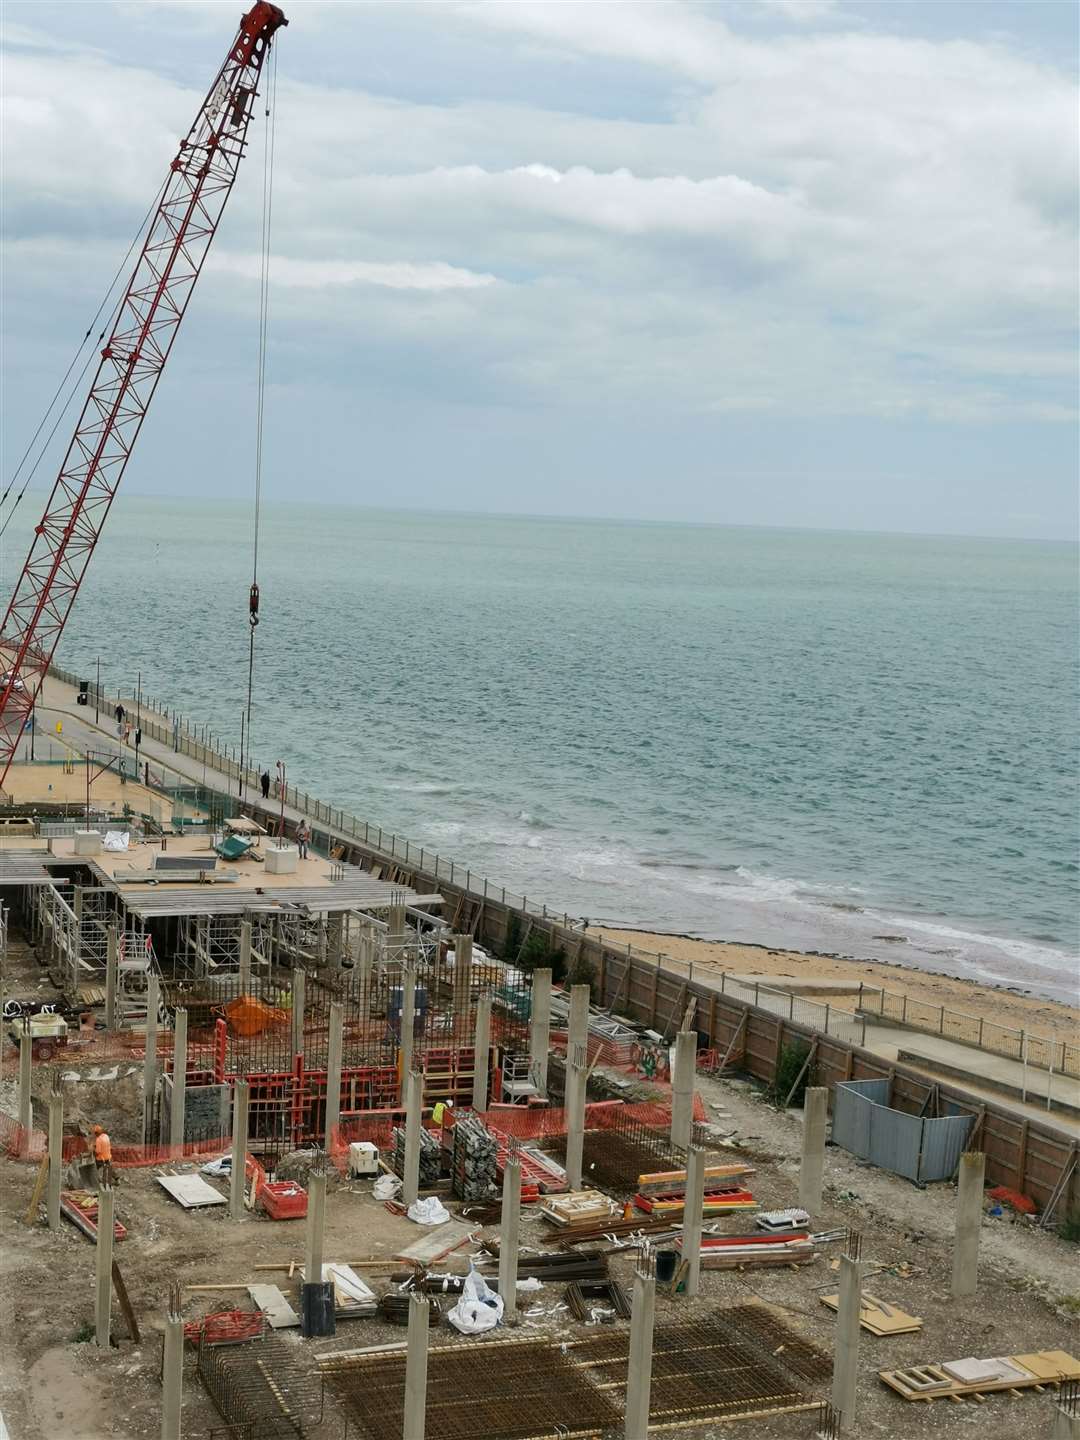 A crane and workmen are seen working on the site